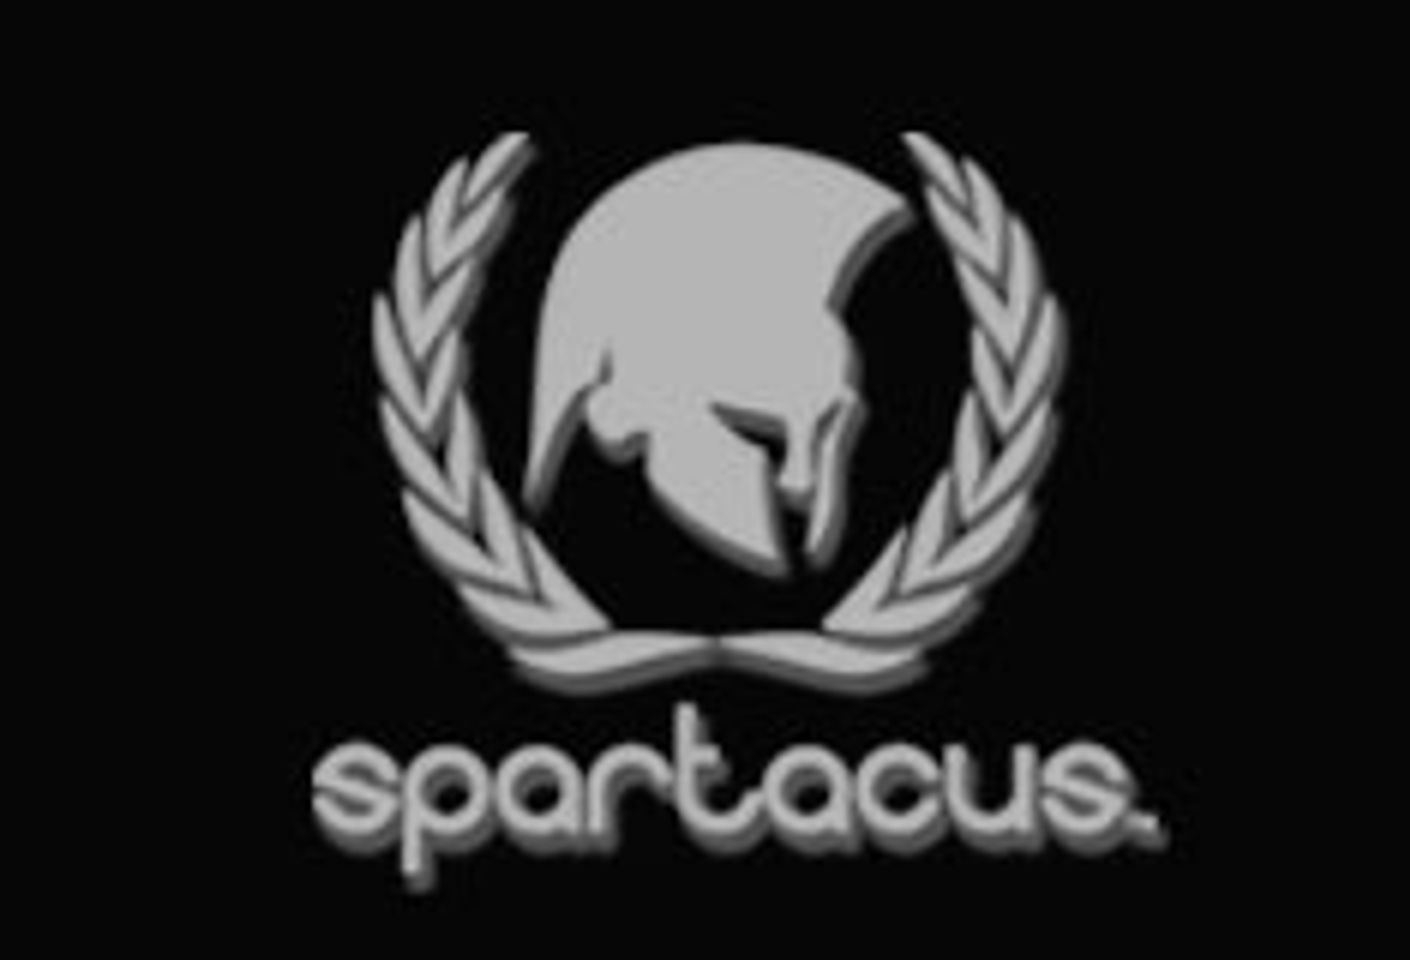 Spartacus Leathers Earns 2 Noms For 2016 AVN Awards